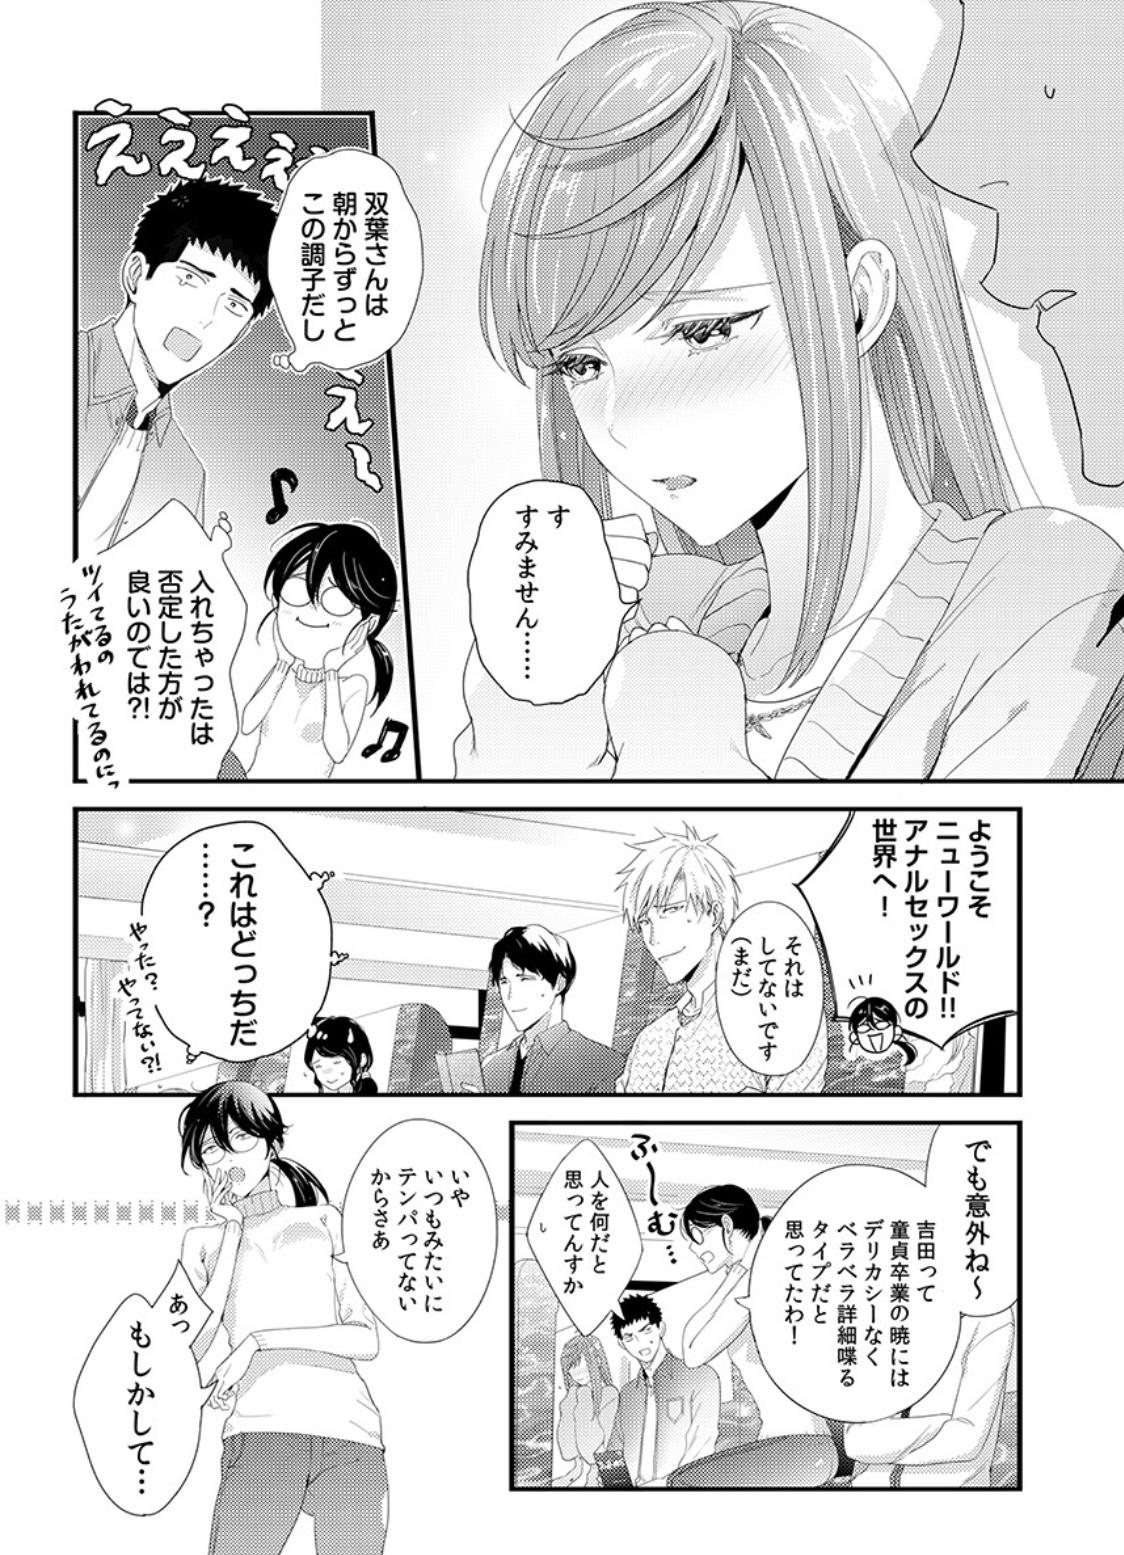 Please Let Me Hold You Futaba-San! Ch. 1-4 31